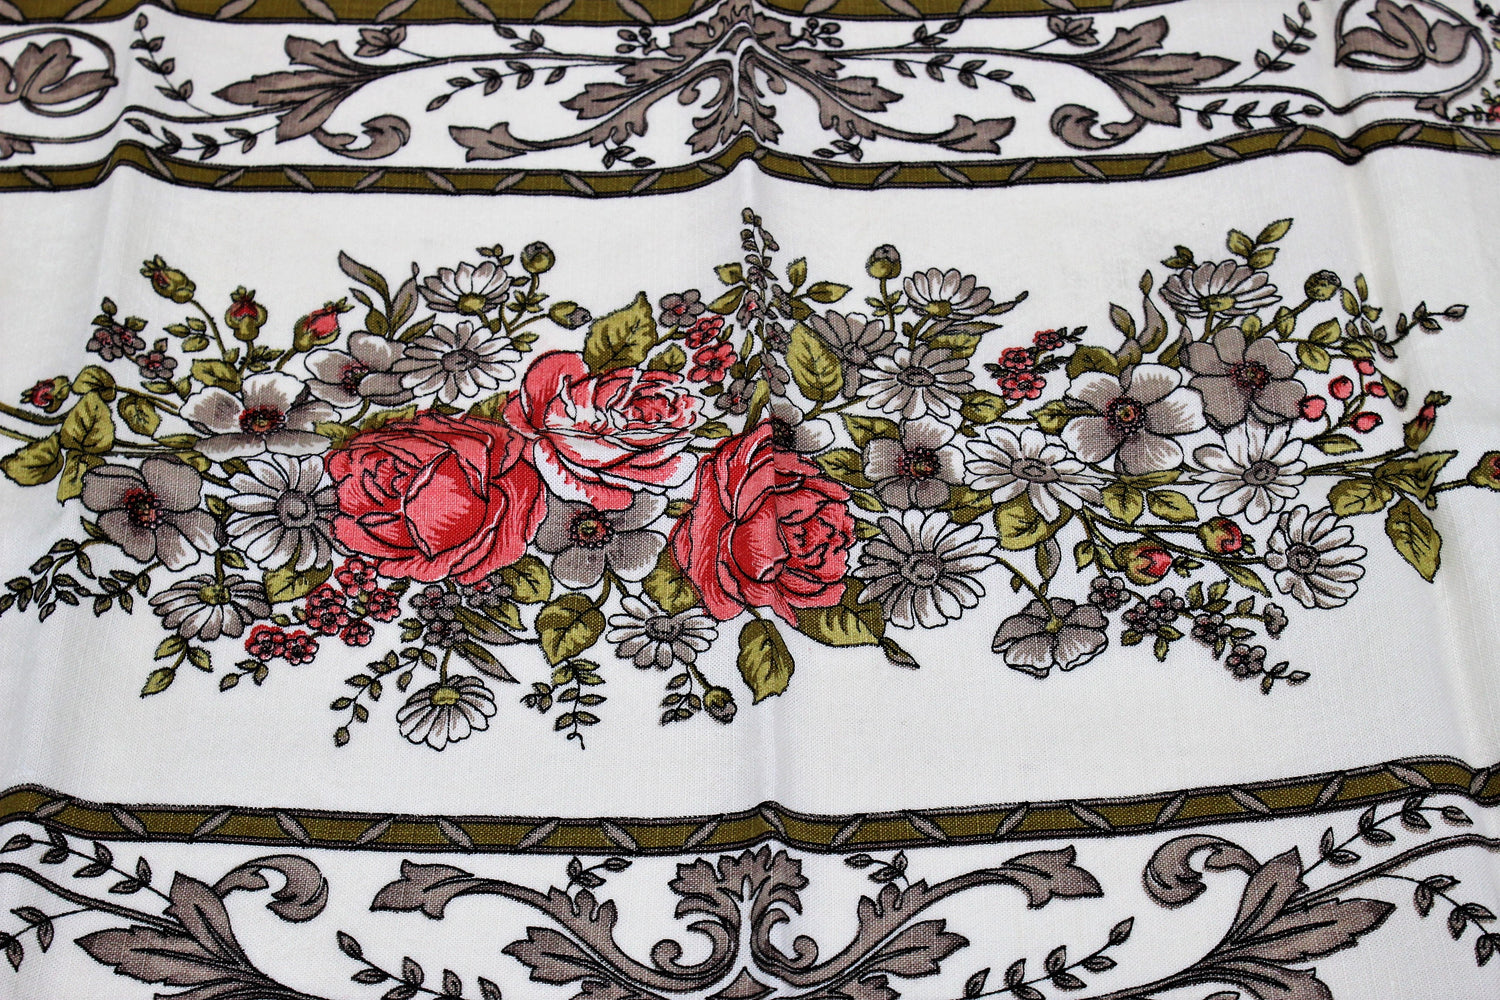 Vintage 1950s Table Runner With Floral Print in White Barkcloth